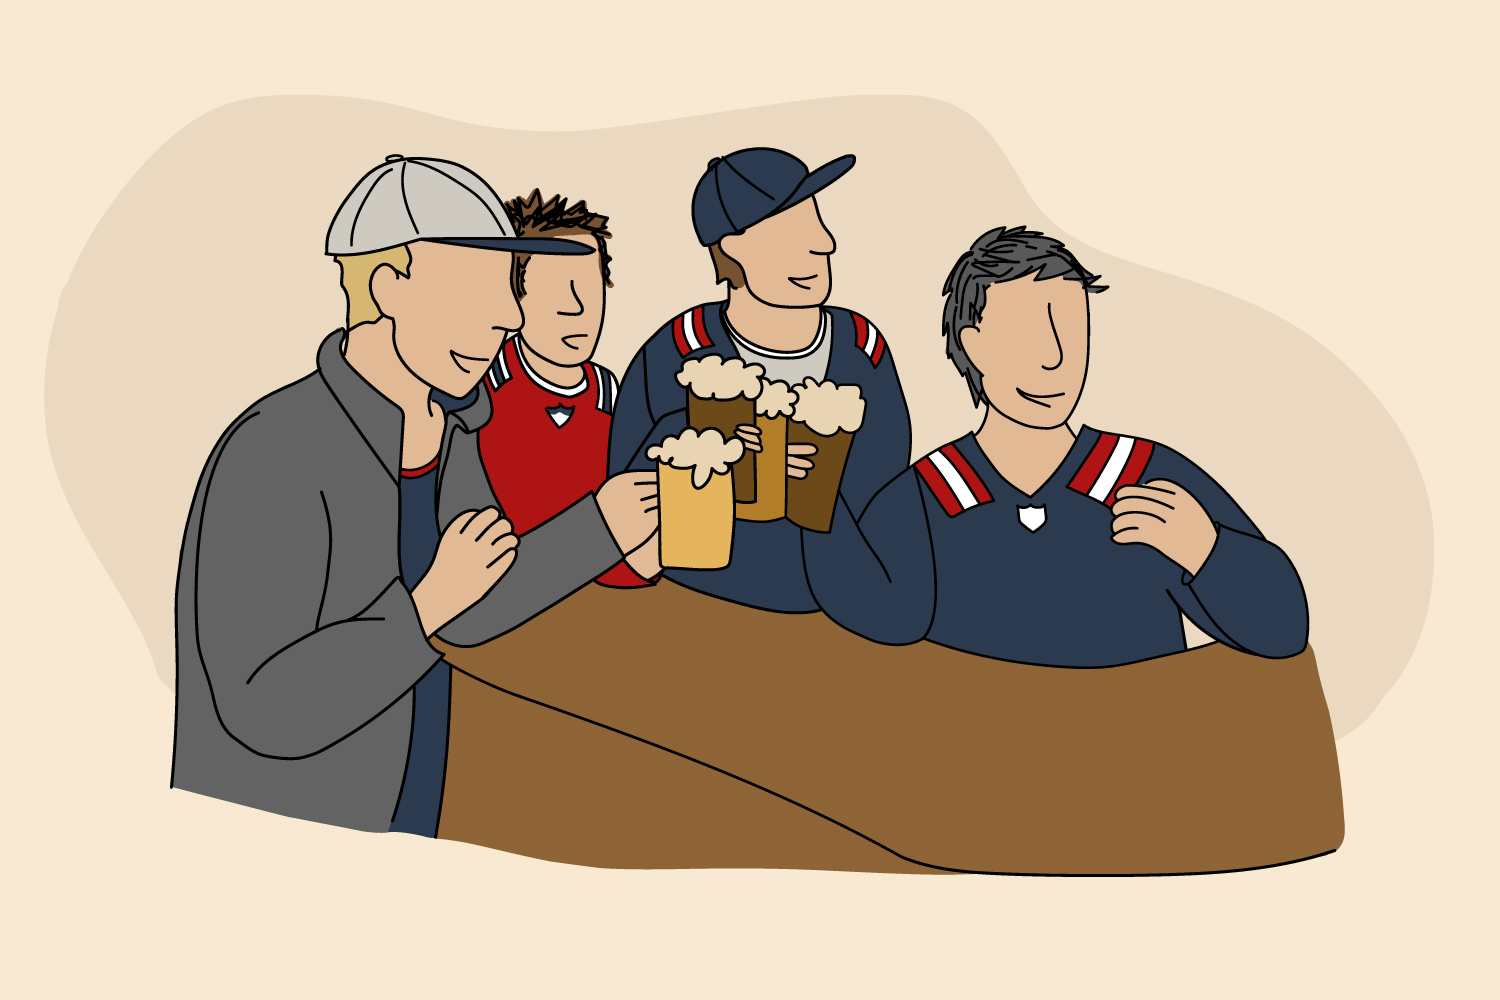 An illustration of four people in a bar with beer